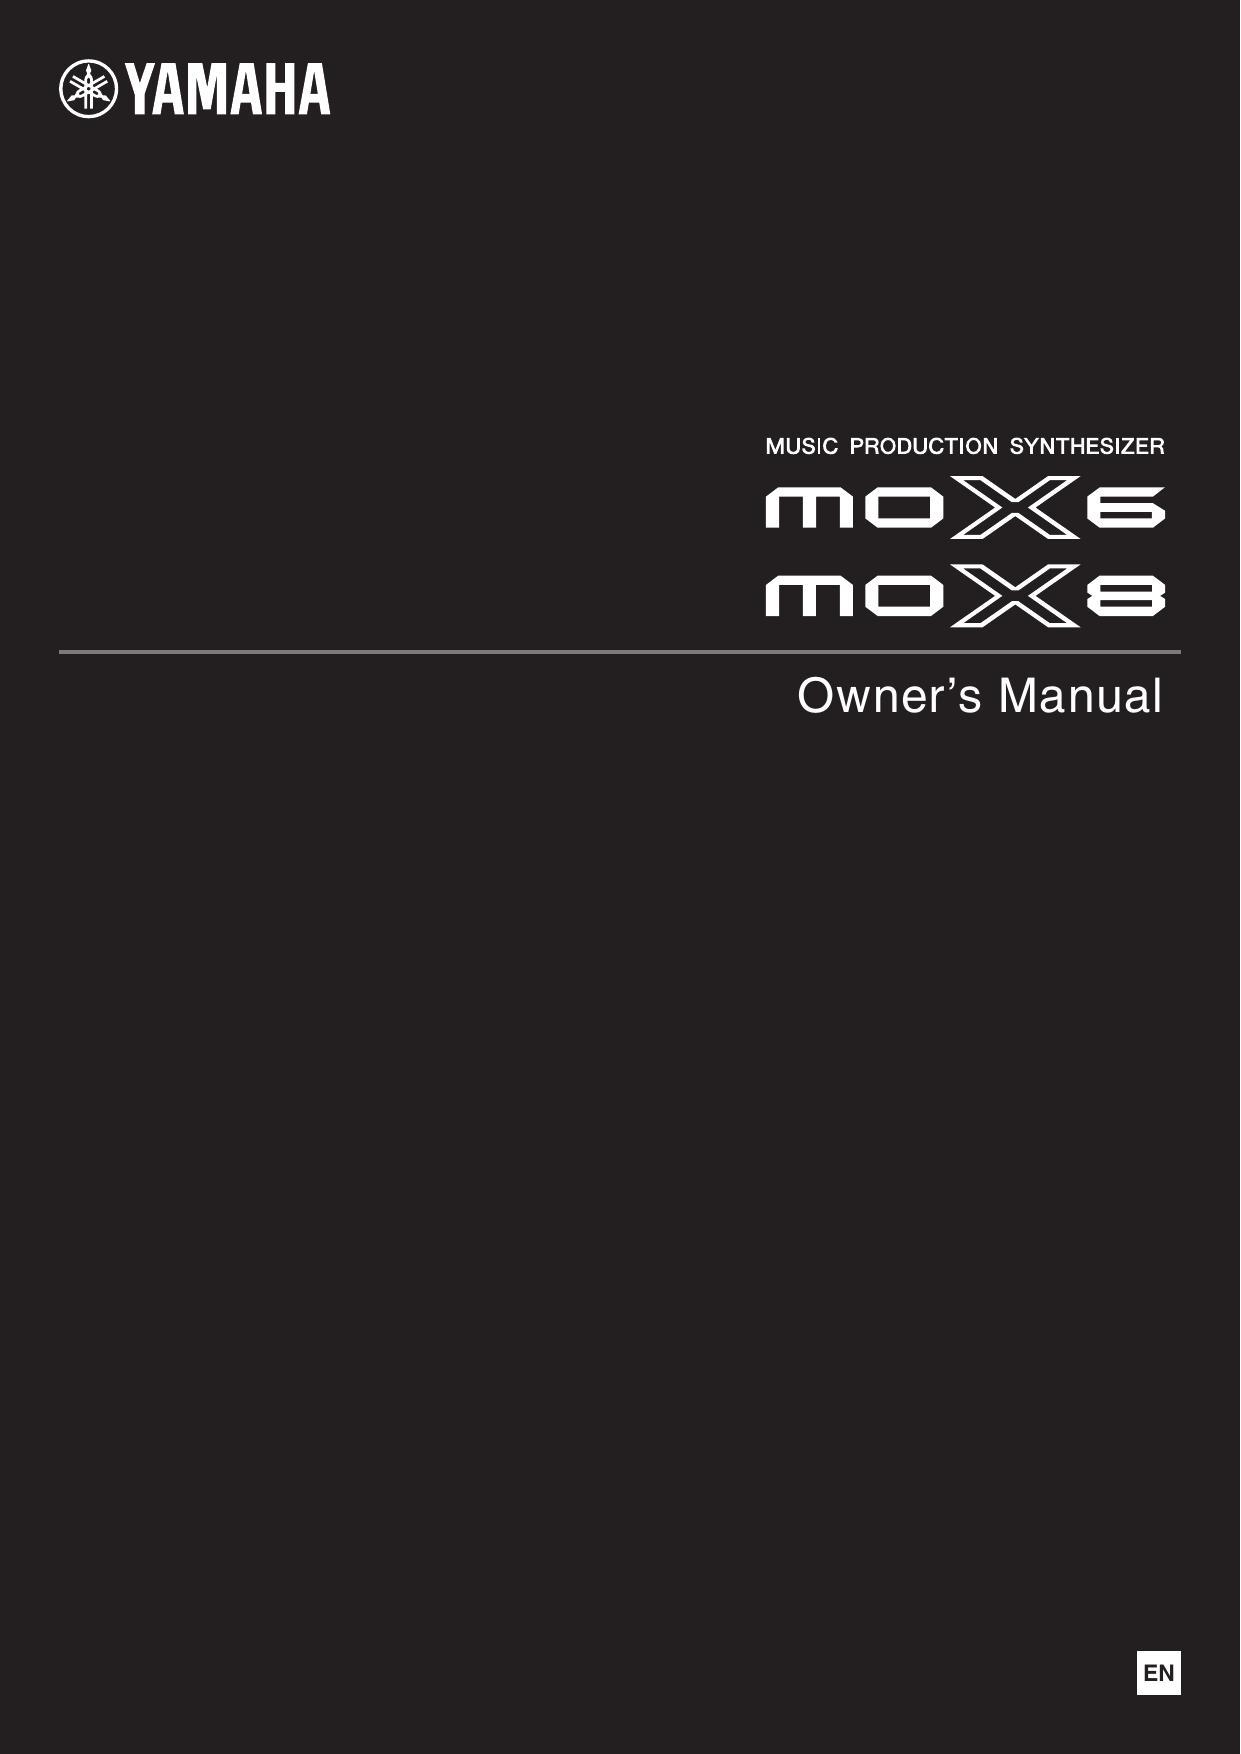 music-production-synthesizer-mox6mox8-owners-manual.pdf